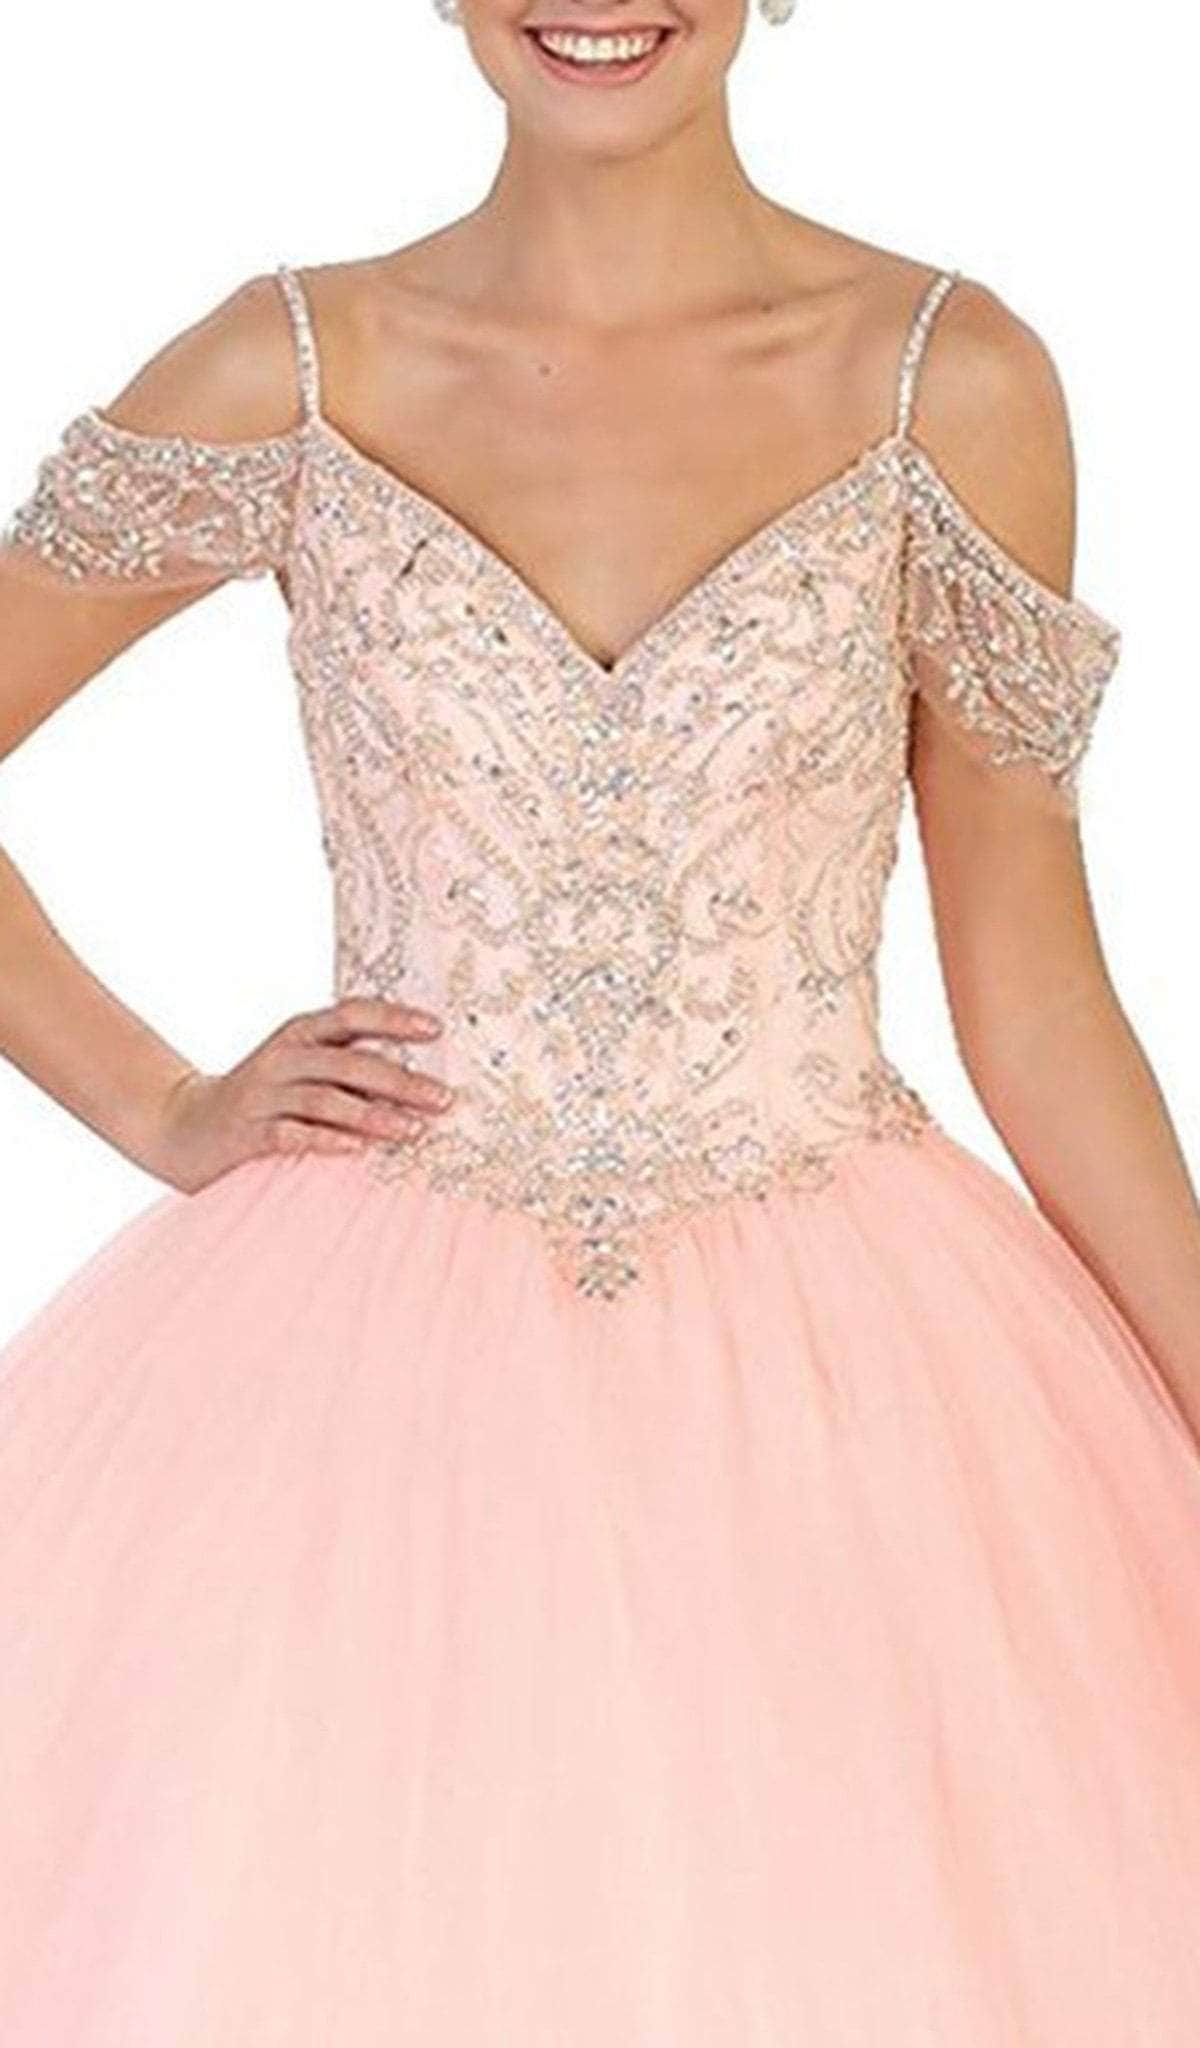 May Queen LK96 - Cold Shoulder Embellished Quinceanera Ballgown Quinceanera Dresses 12 